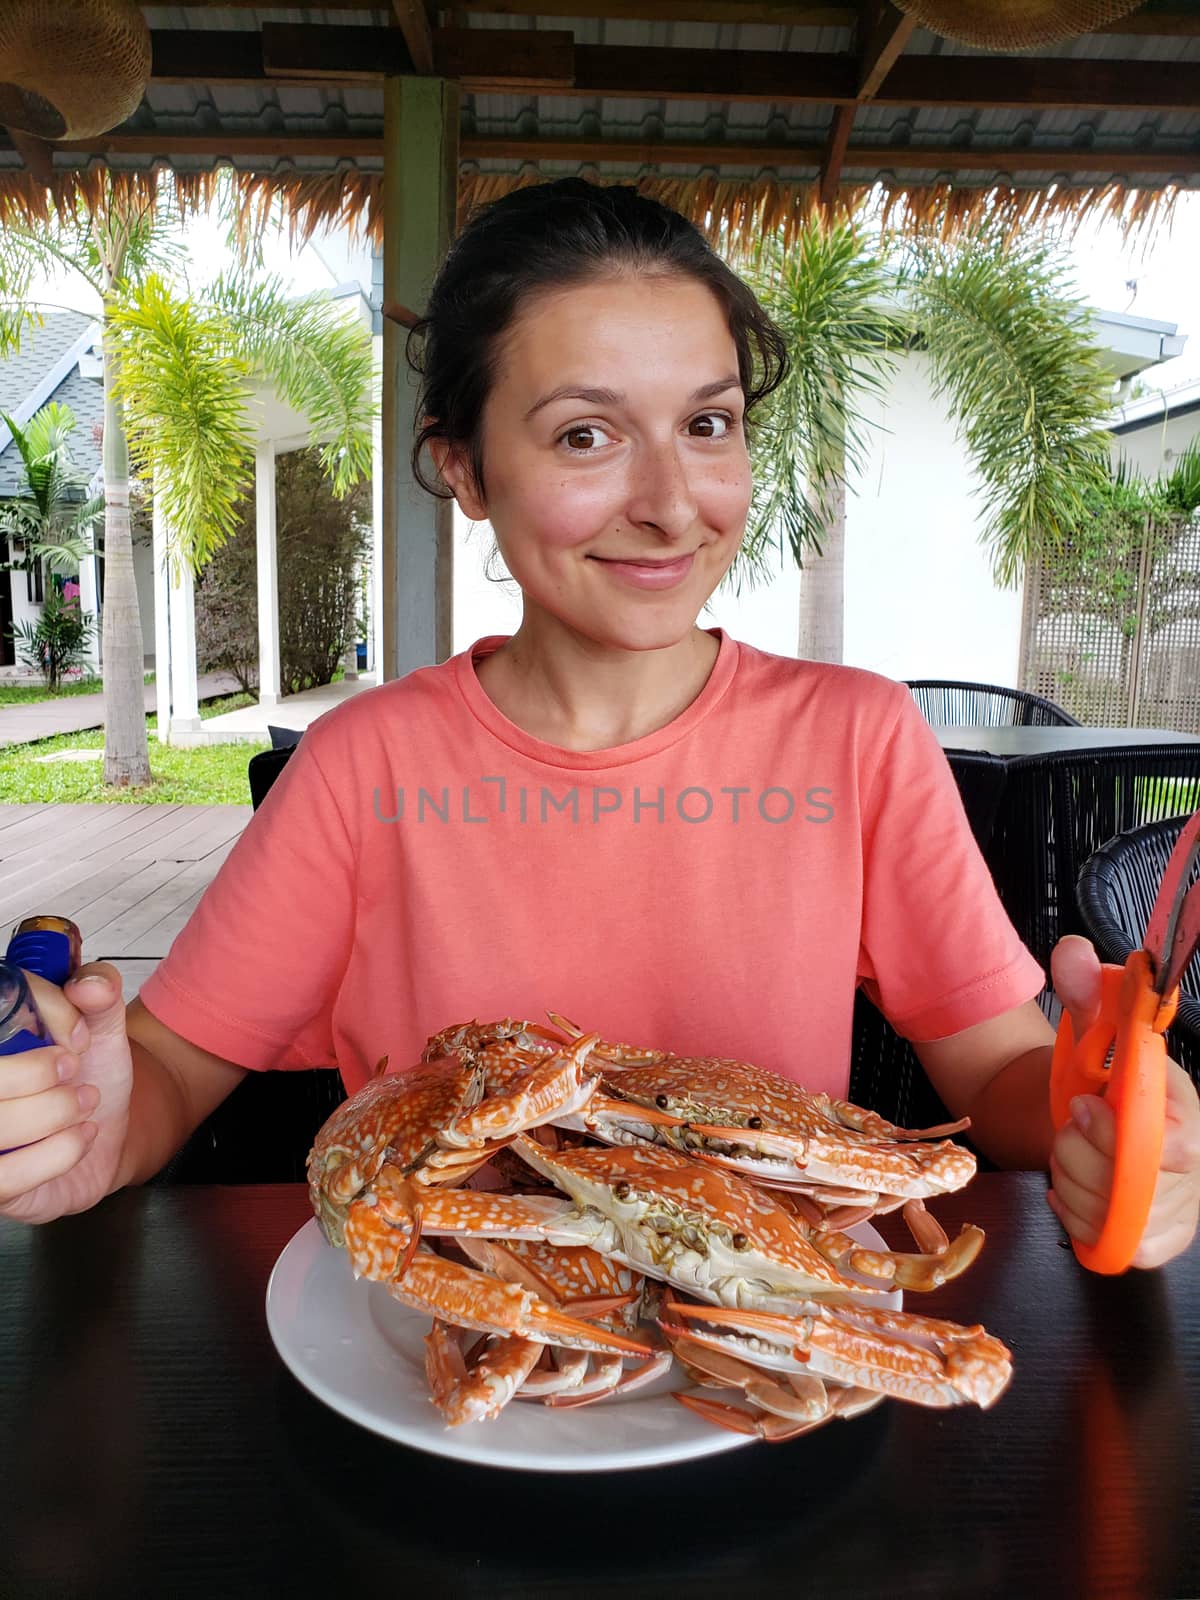 The girl is going to eat boiled crabs. The girl at the table with a full plate of boiled blue crabs.